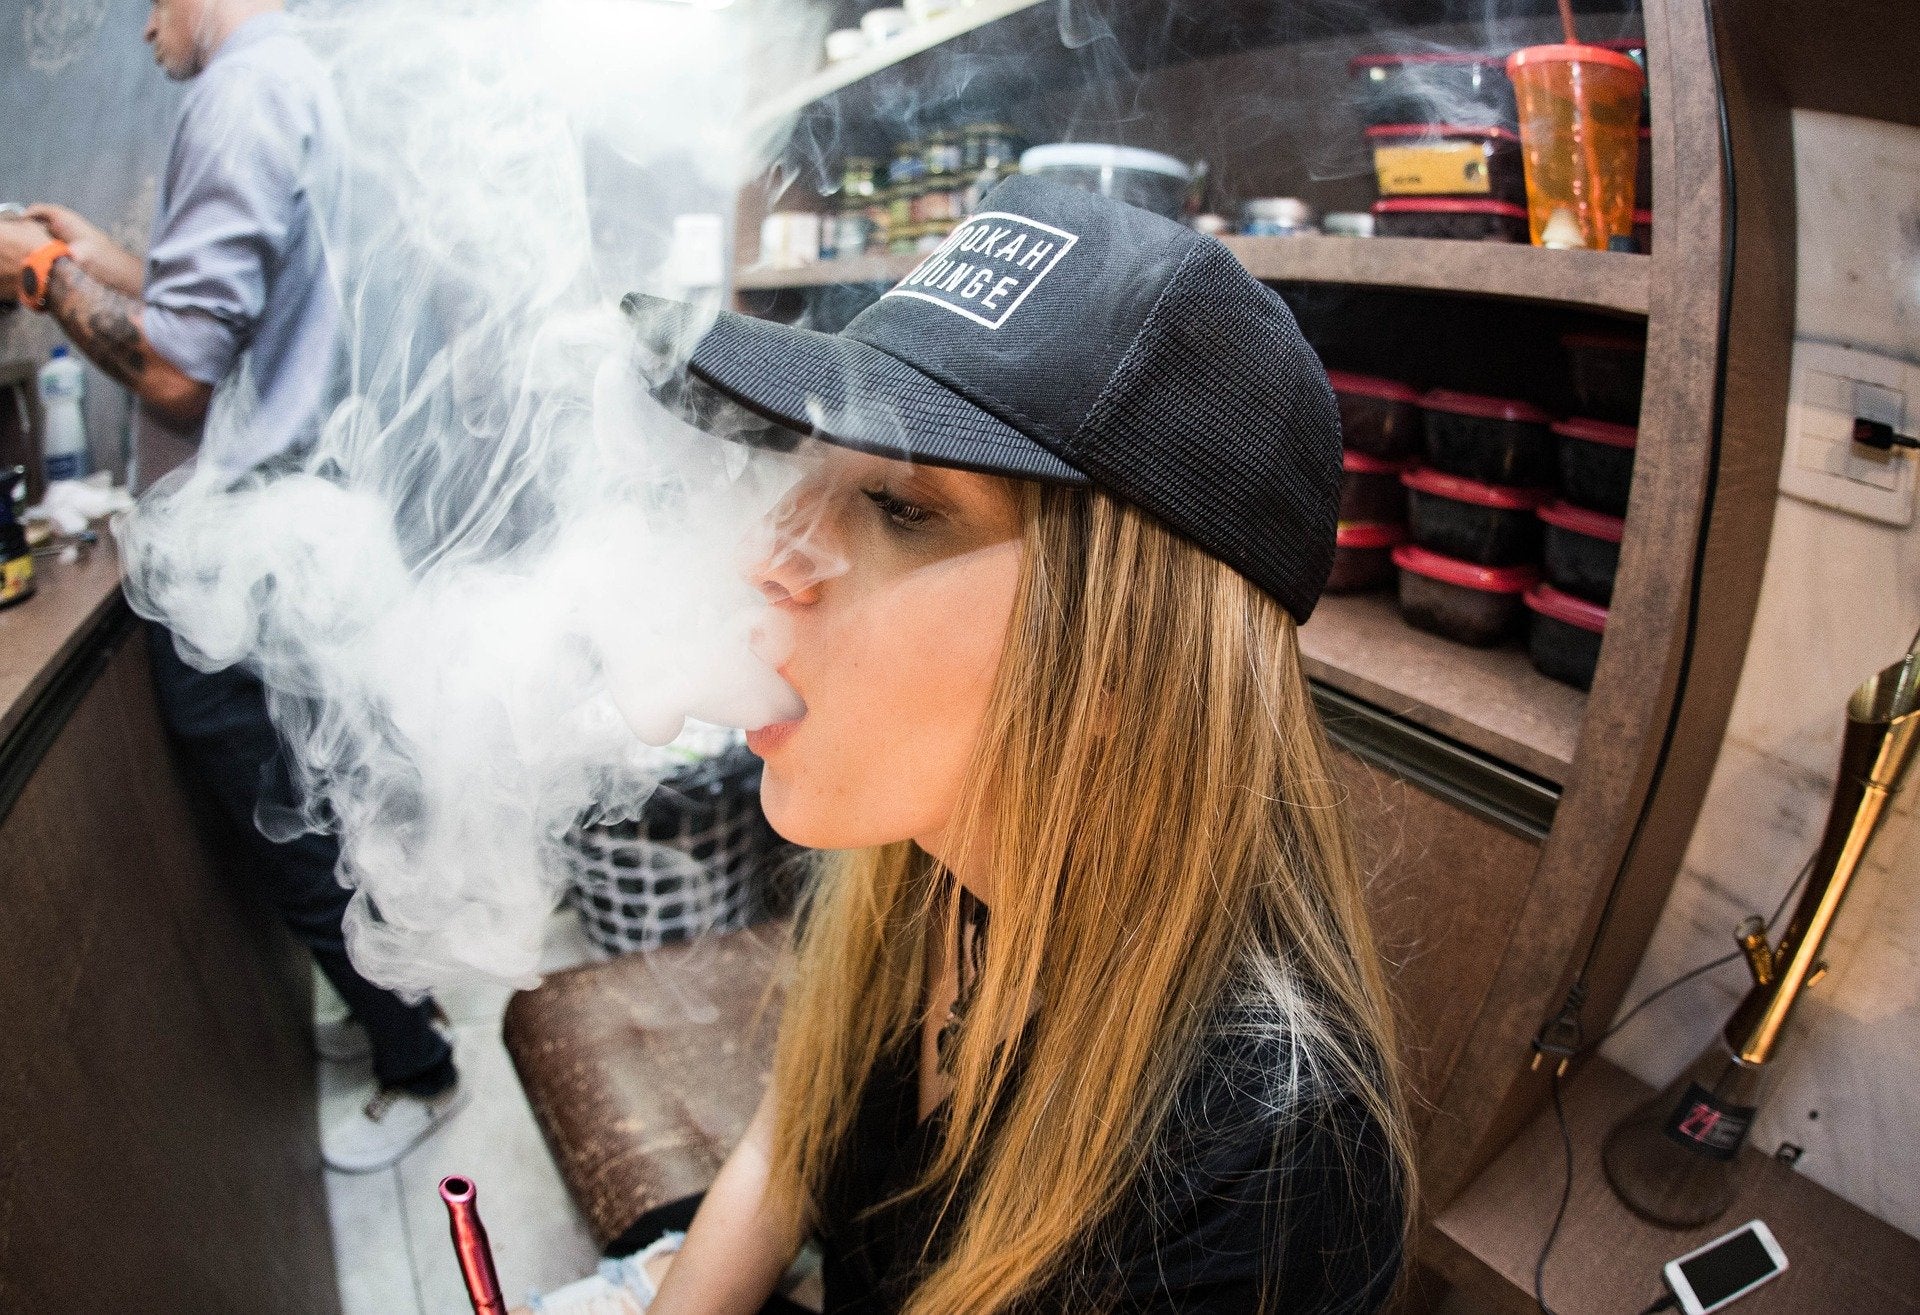 Vaping 101: Is Second Hand Vapour Hamrful to Your Health? - V8PR.uk